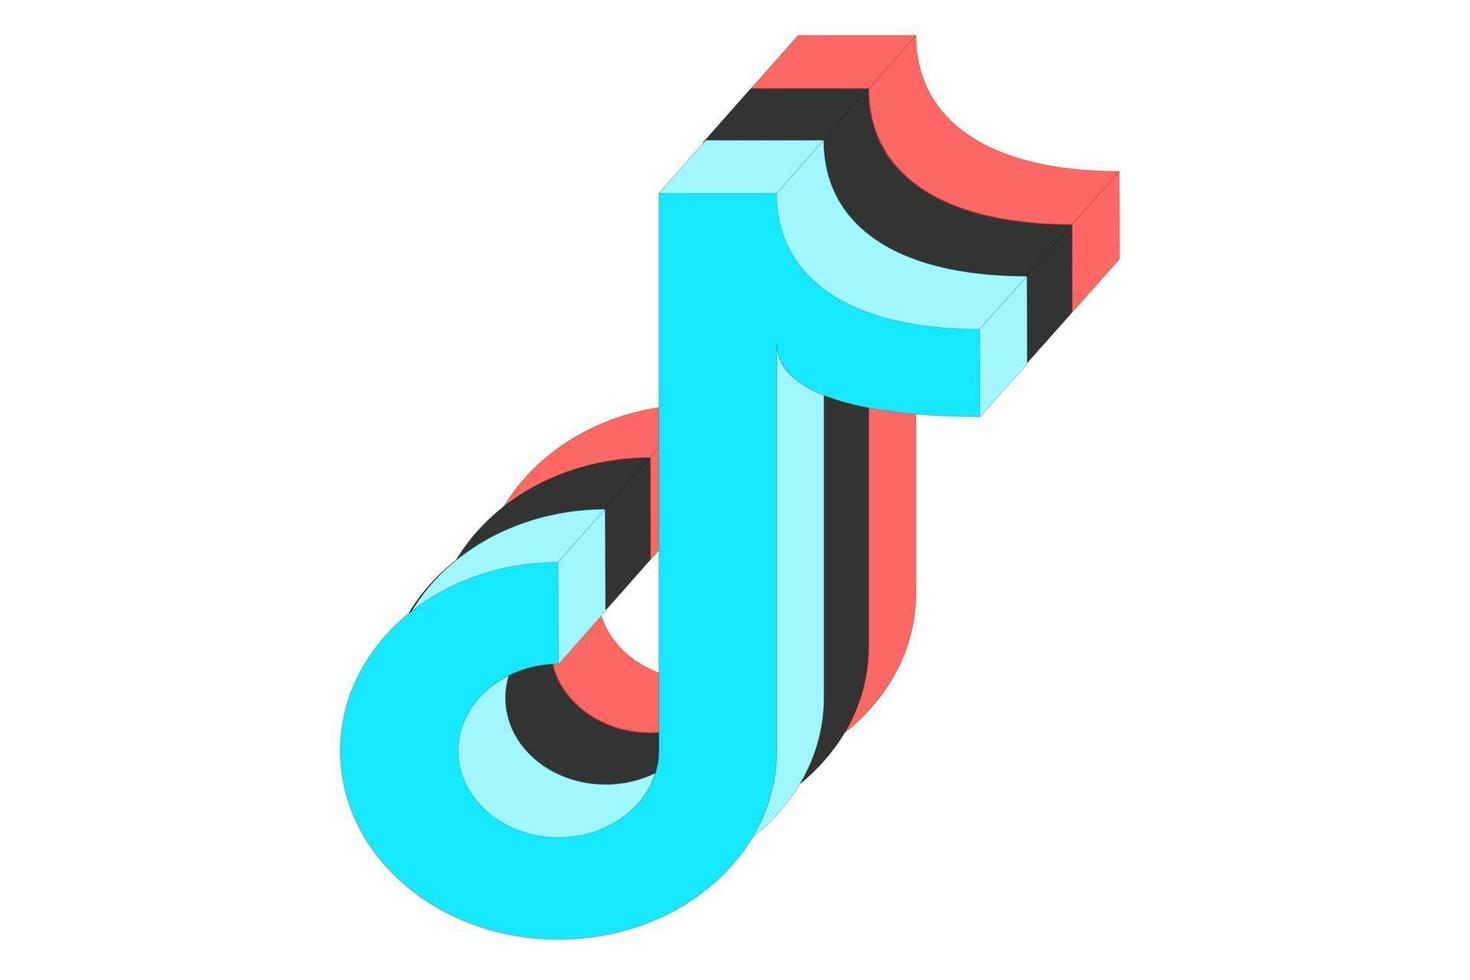 Tiktok Three music note in 3d in blue, black and red colors isolated on white background. vector